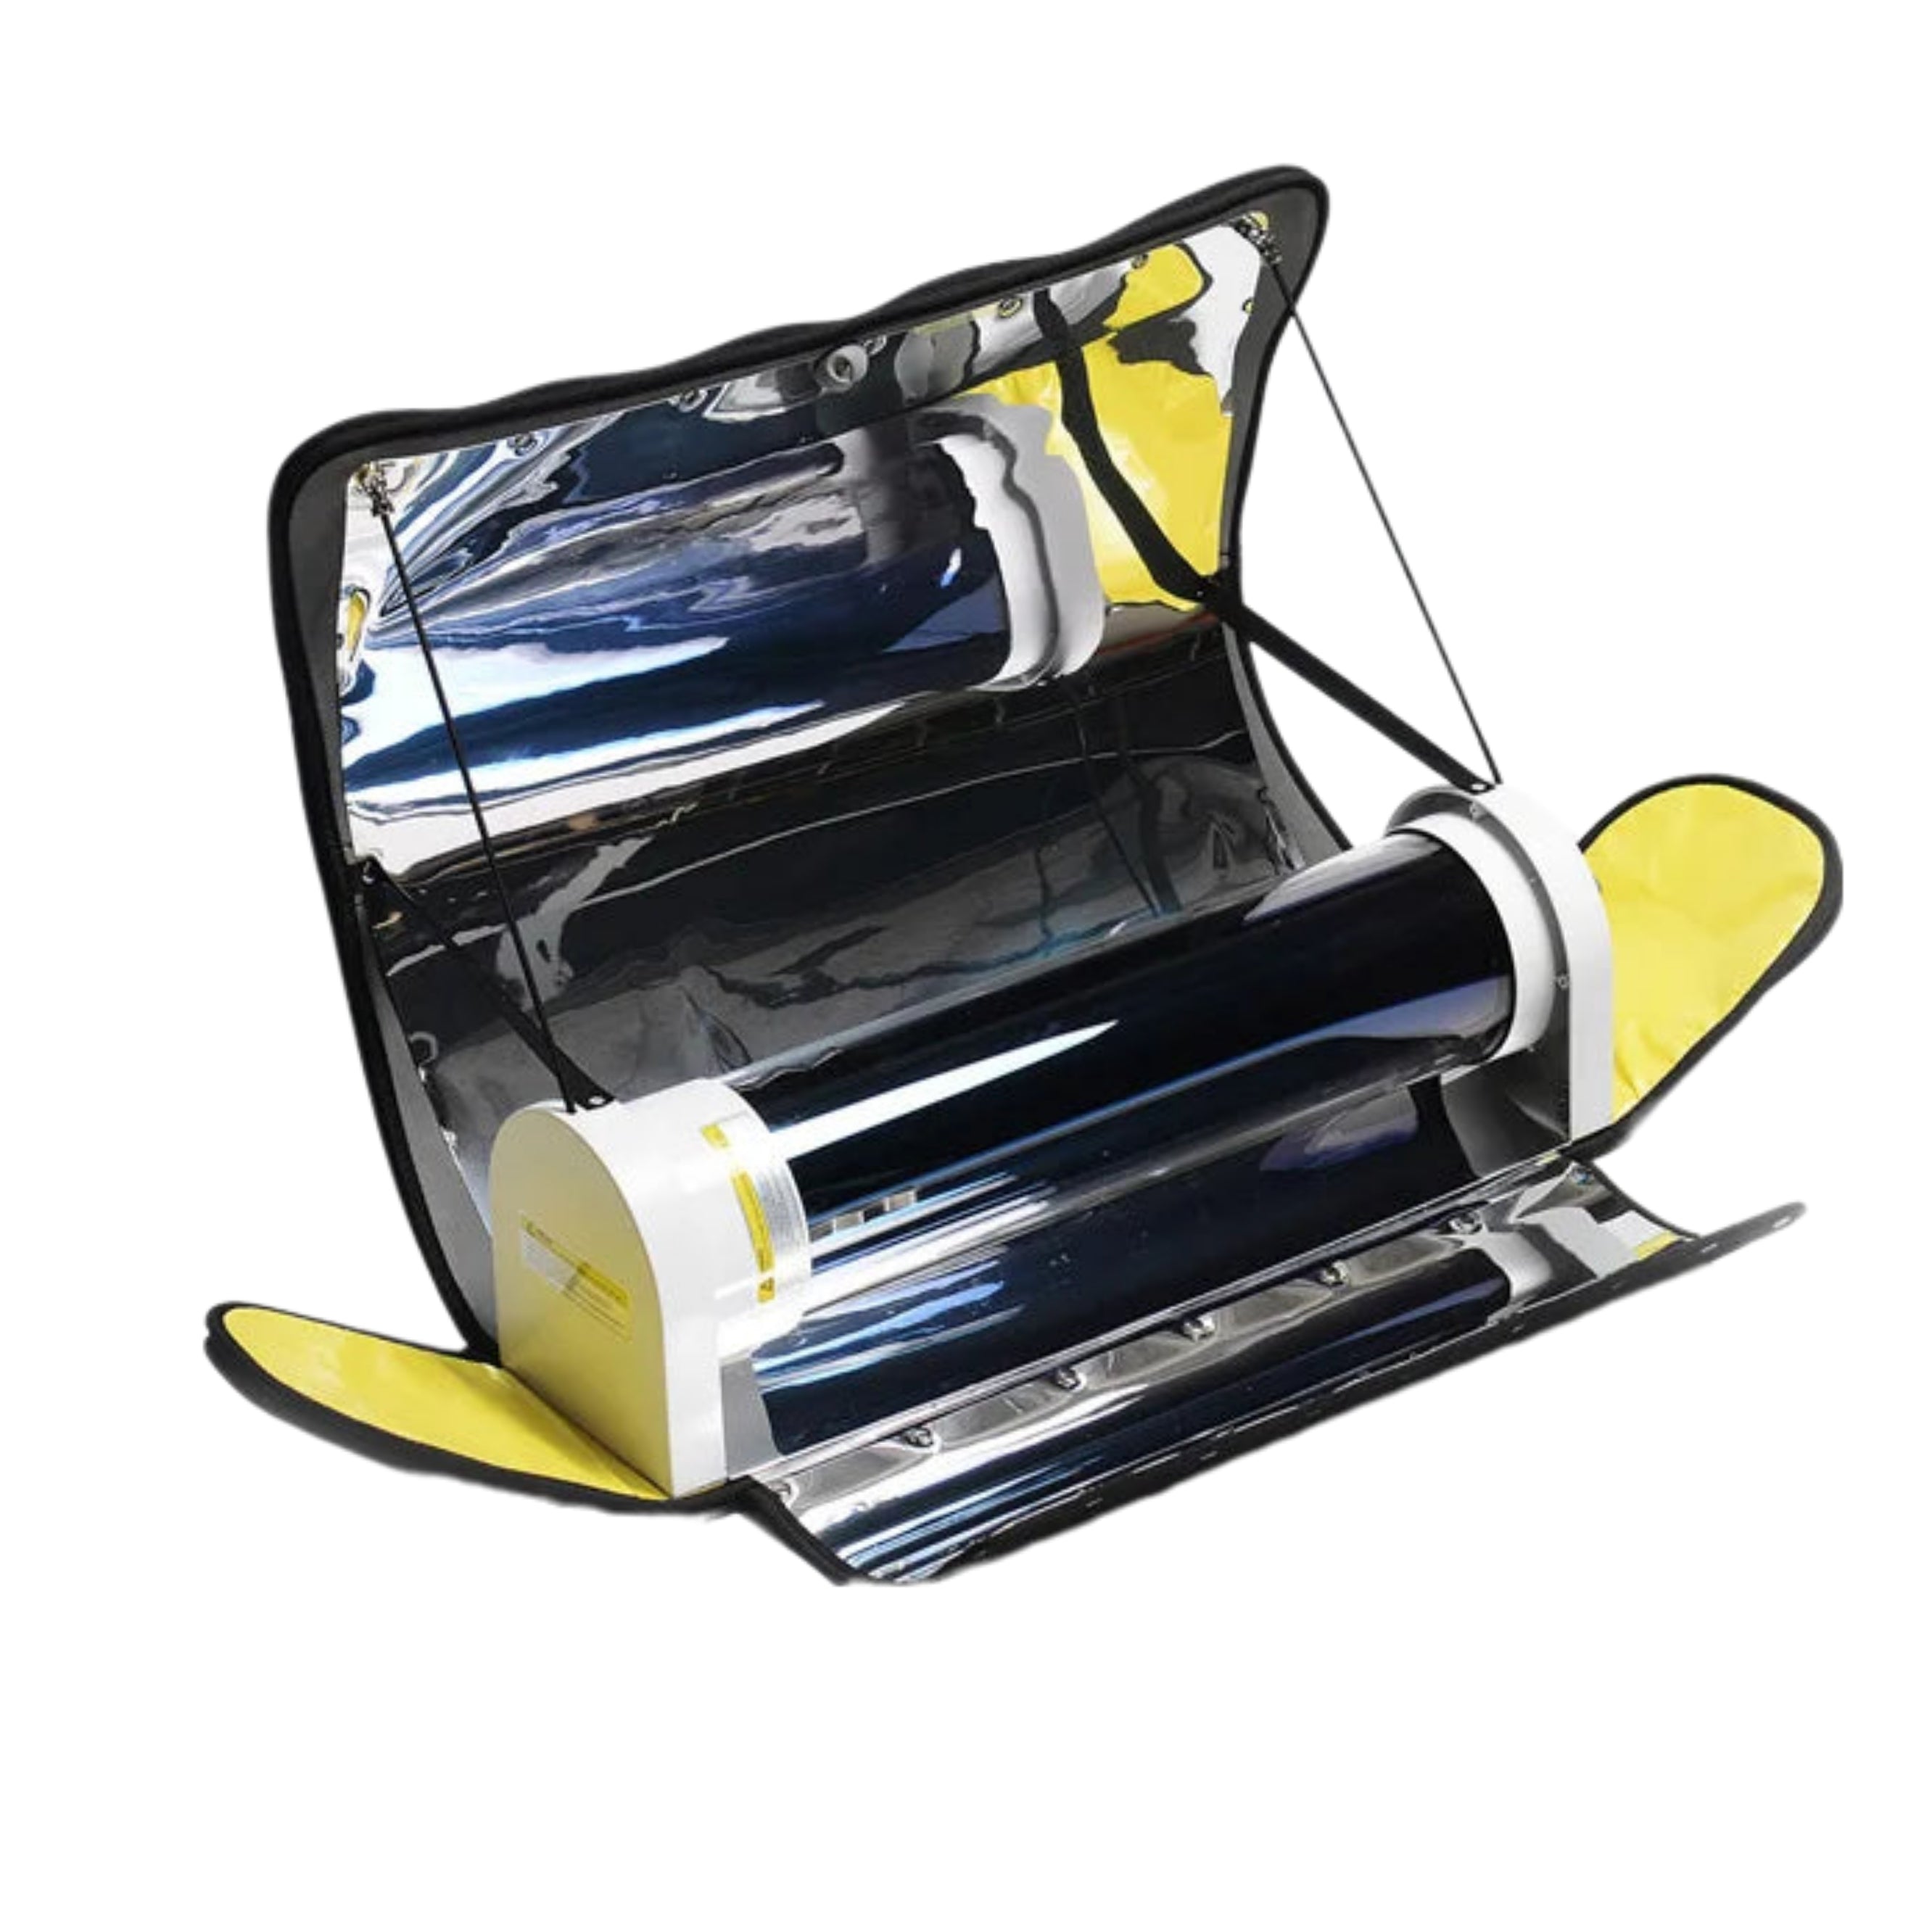 Portable Solar Oven - 4.5L Stove Solar Cooker Set BBQ Grill Solar Oven with Portable Case Outdoor Solar Grill Oven